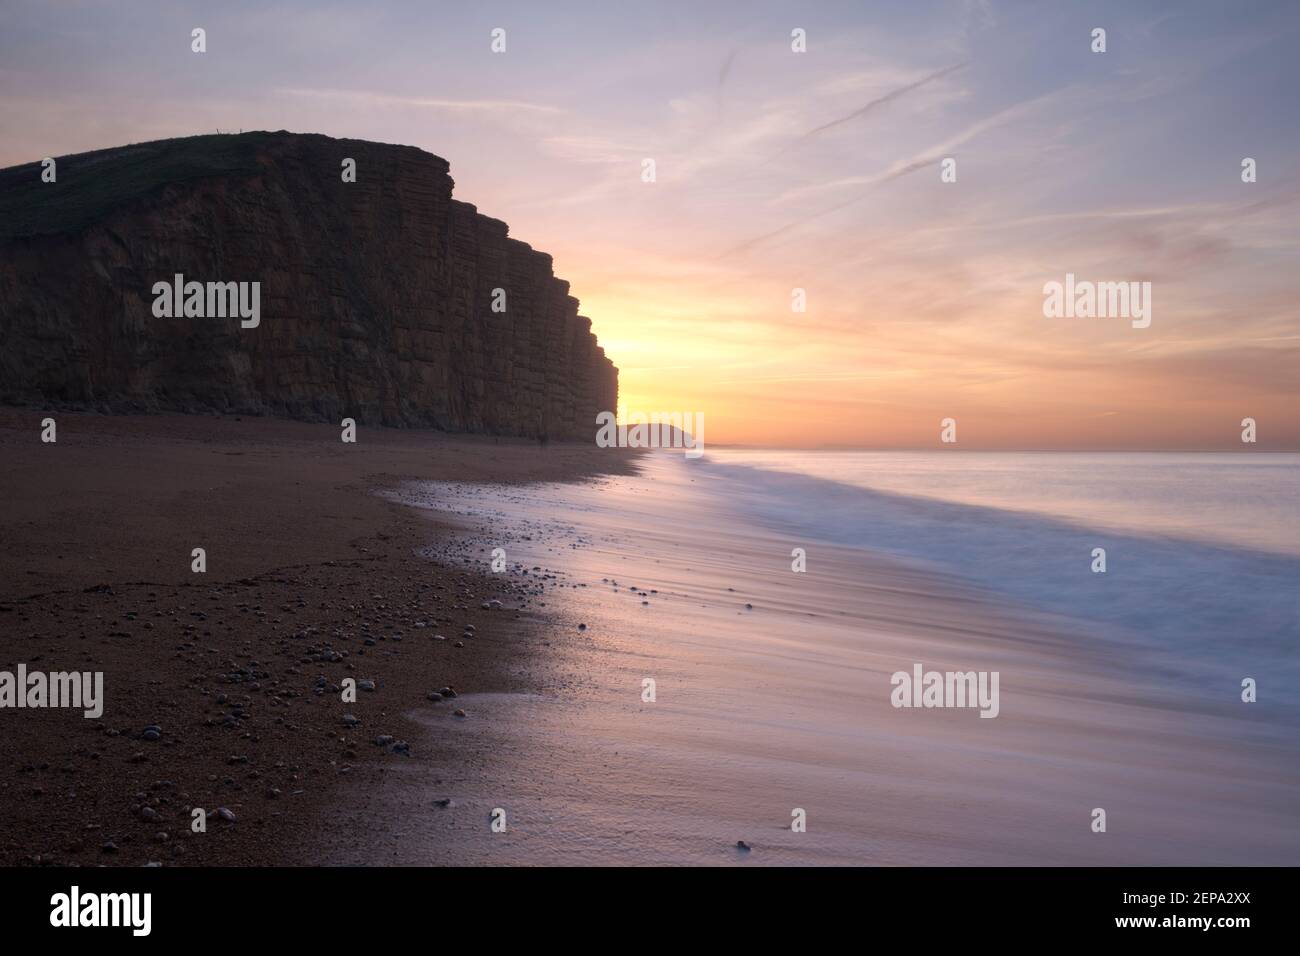 Sunrise over East Cliff while the tide laps the beach at West Bay, Dorset, UK. Stock Photo